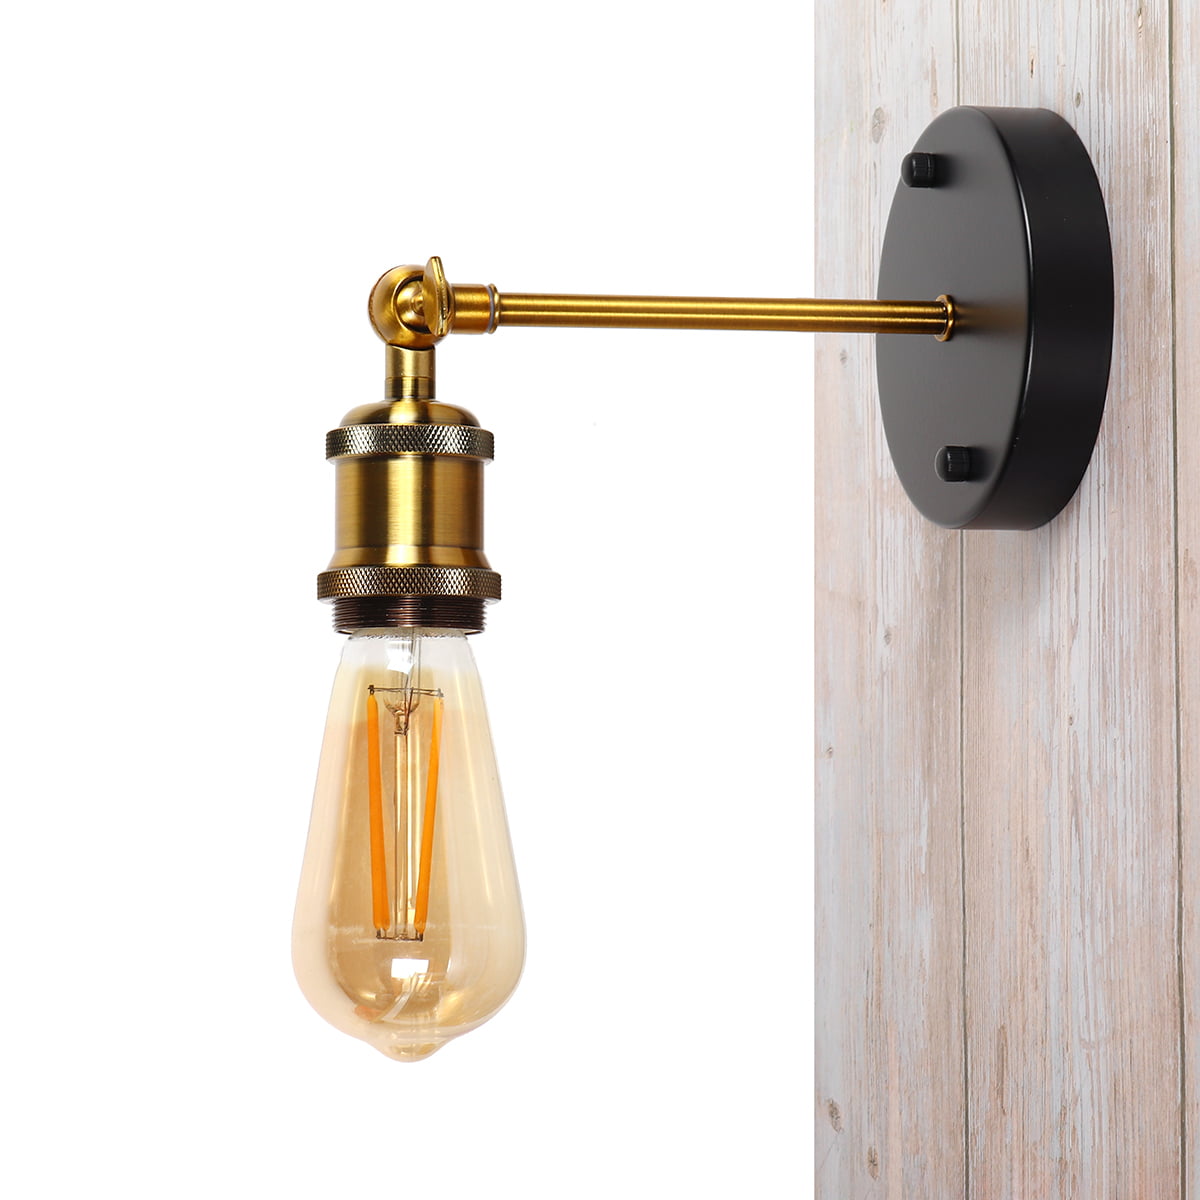 Blue Wall Sconces Light Pure copper UL certification lamp holder with knob switch Base Wall Industrial Vintage Edison Simplic Lamp Fixture for Cafe Club-Bulb not included